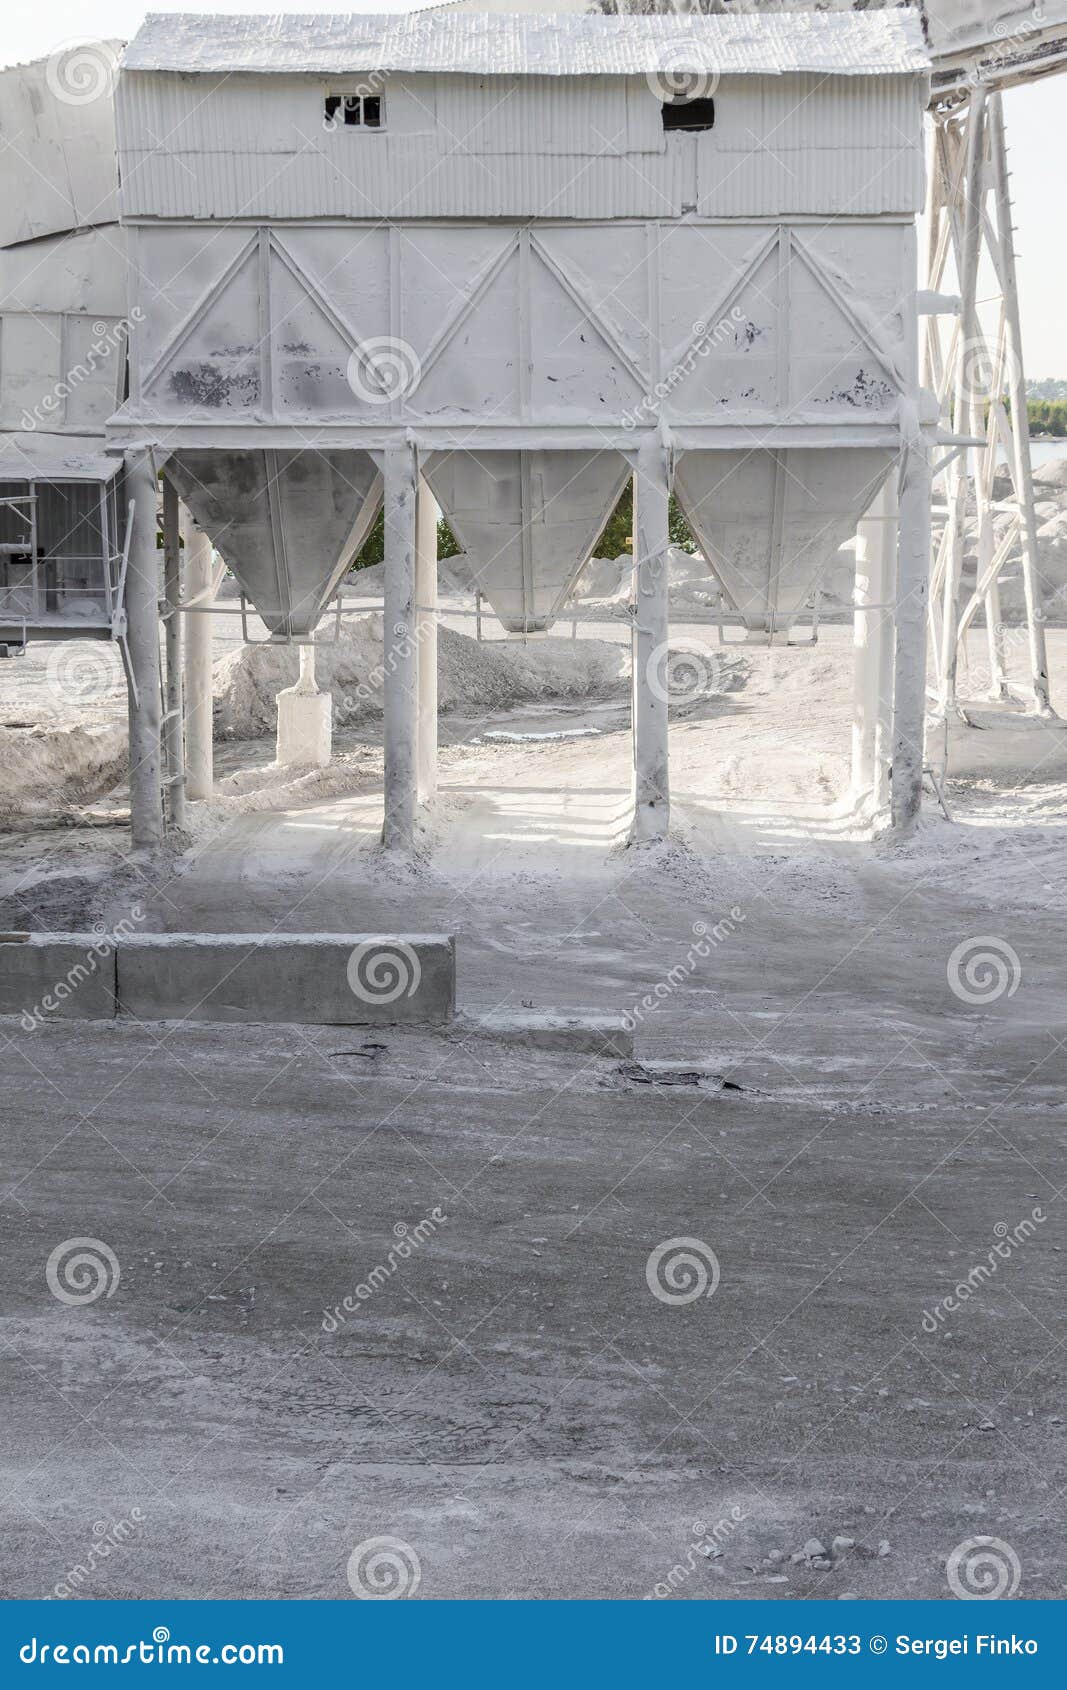 Part of a Small Cement Factory Stock Image - Image of metallic, loading